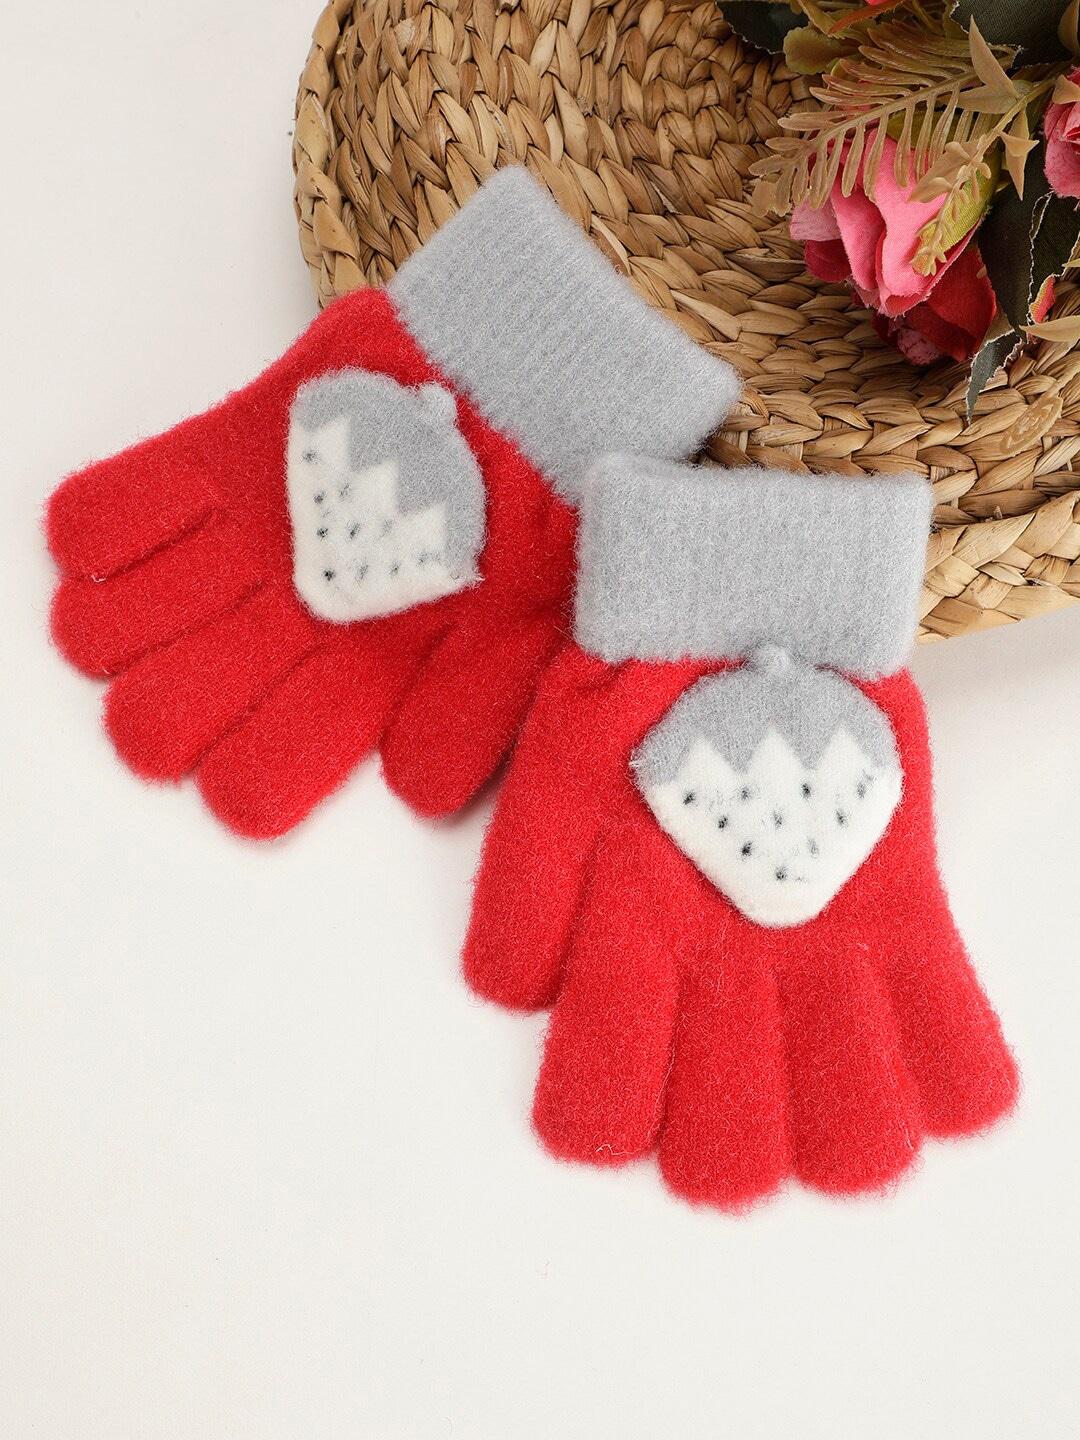 passion petals unisex self design acrylic gloves with strawberry applique